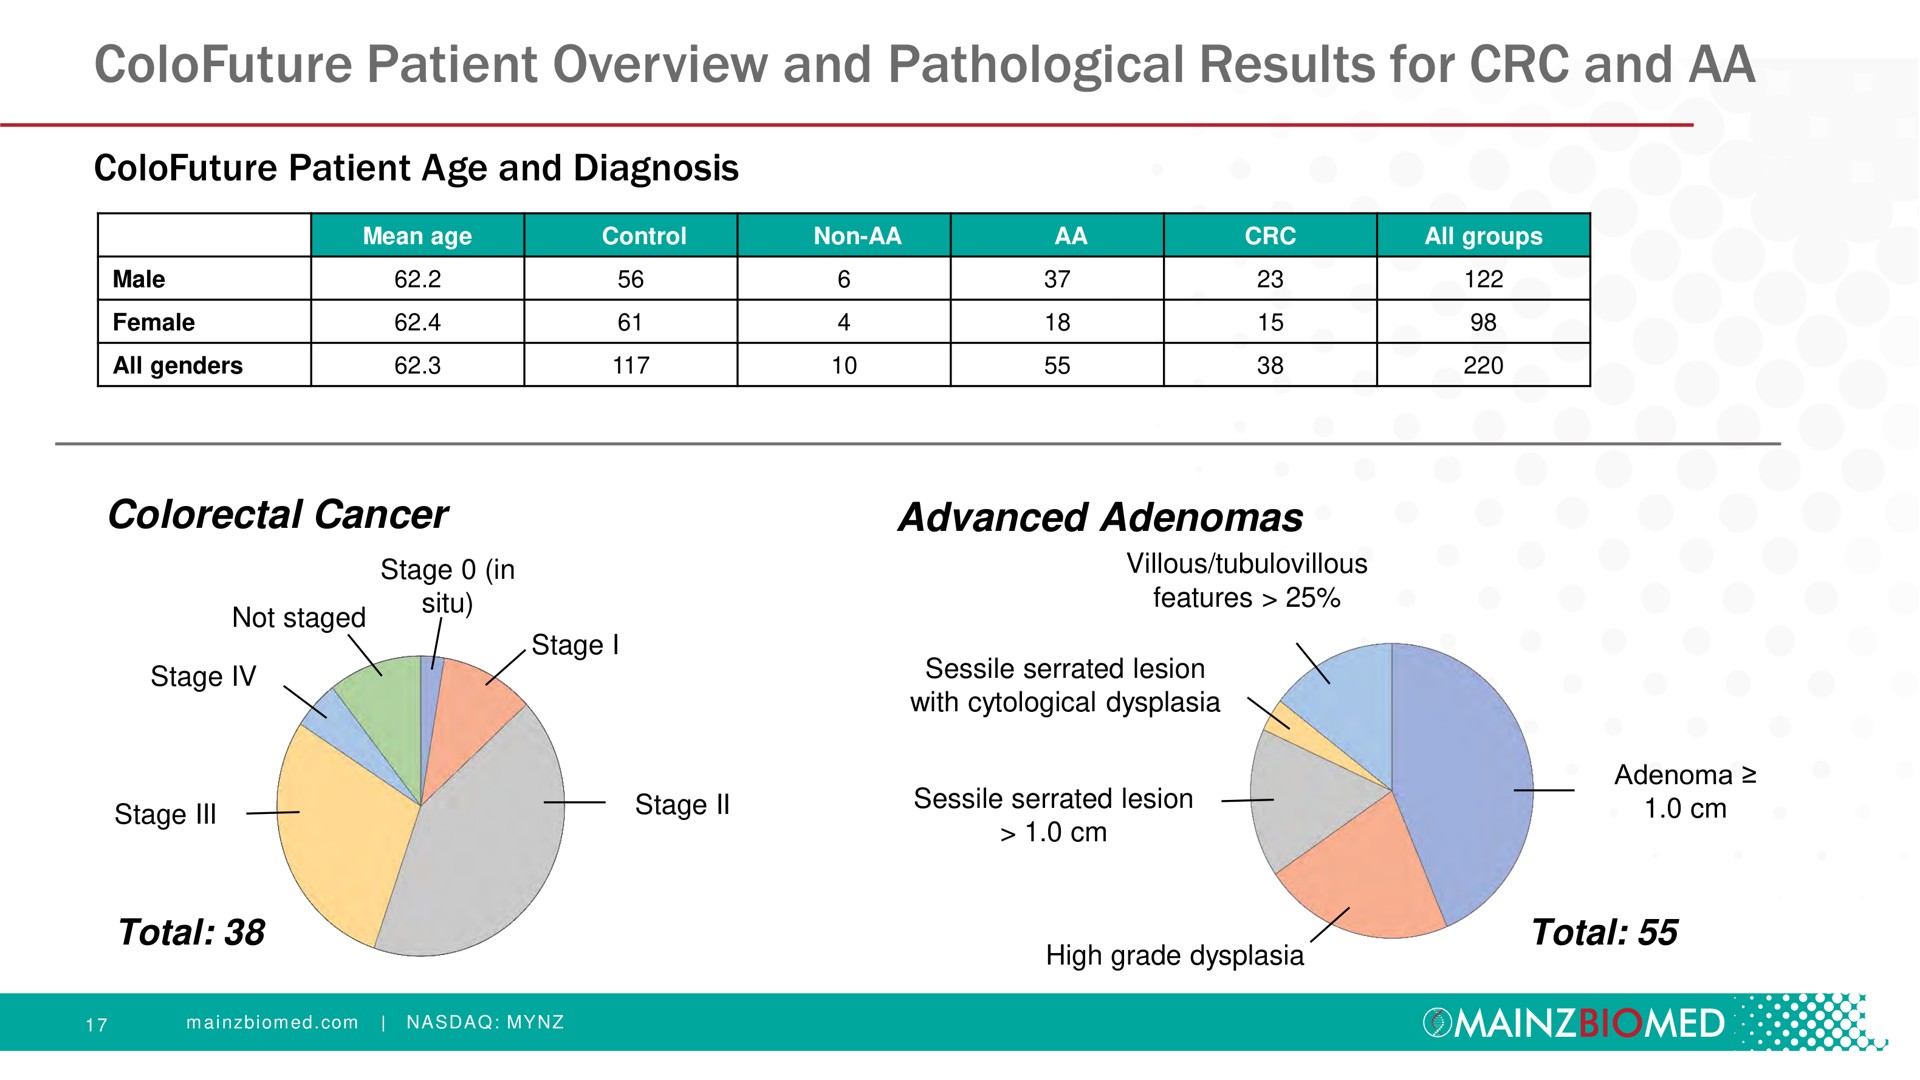 patient overview and pathological results for and | Mainz Biomed NV